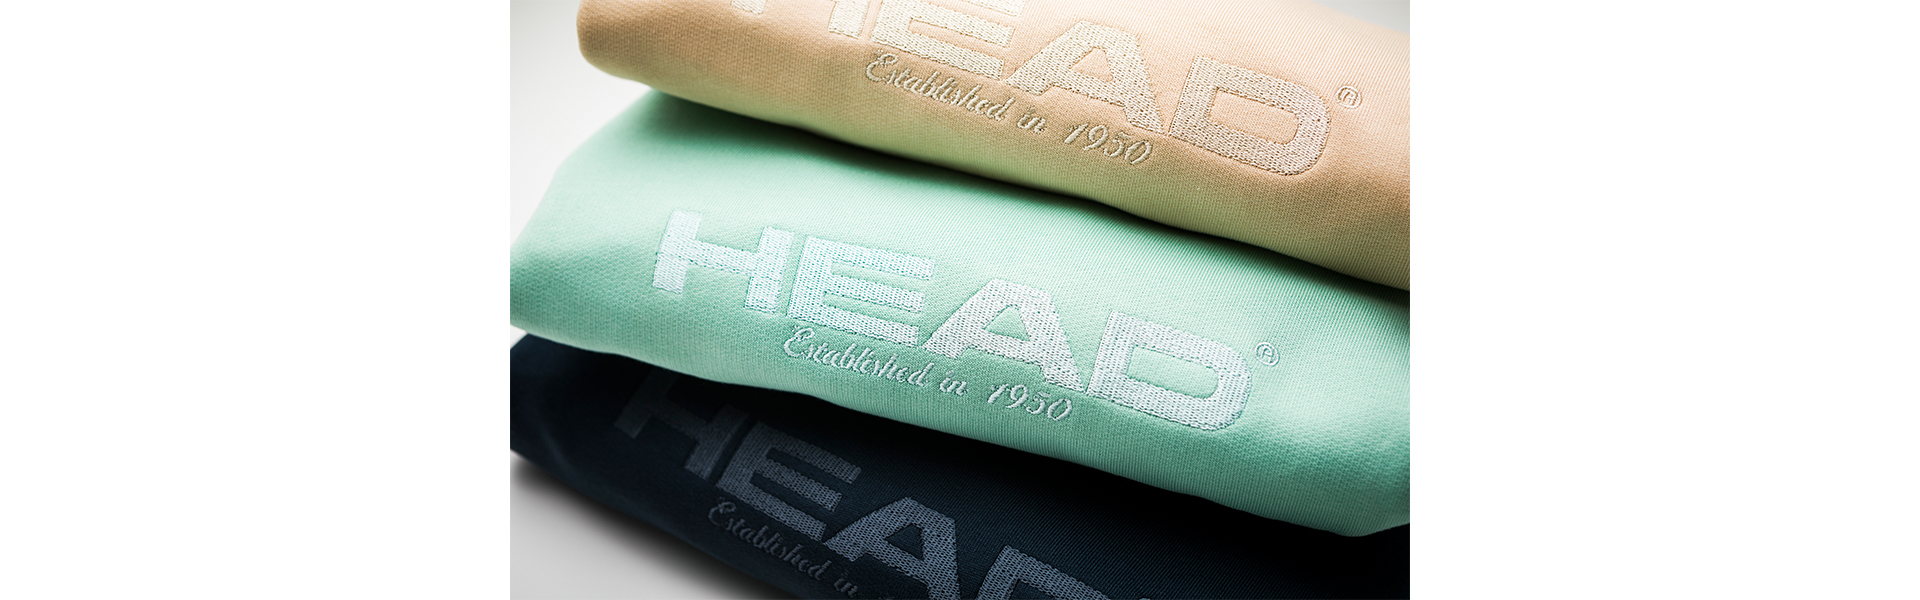 HEAD SPORTSWEAR LAUNCHES TENNIS, PADEL AND ATHLEISURE LINE IN SUMMER `23